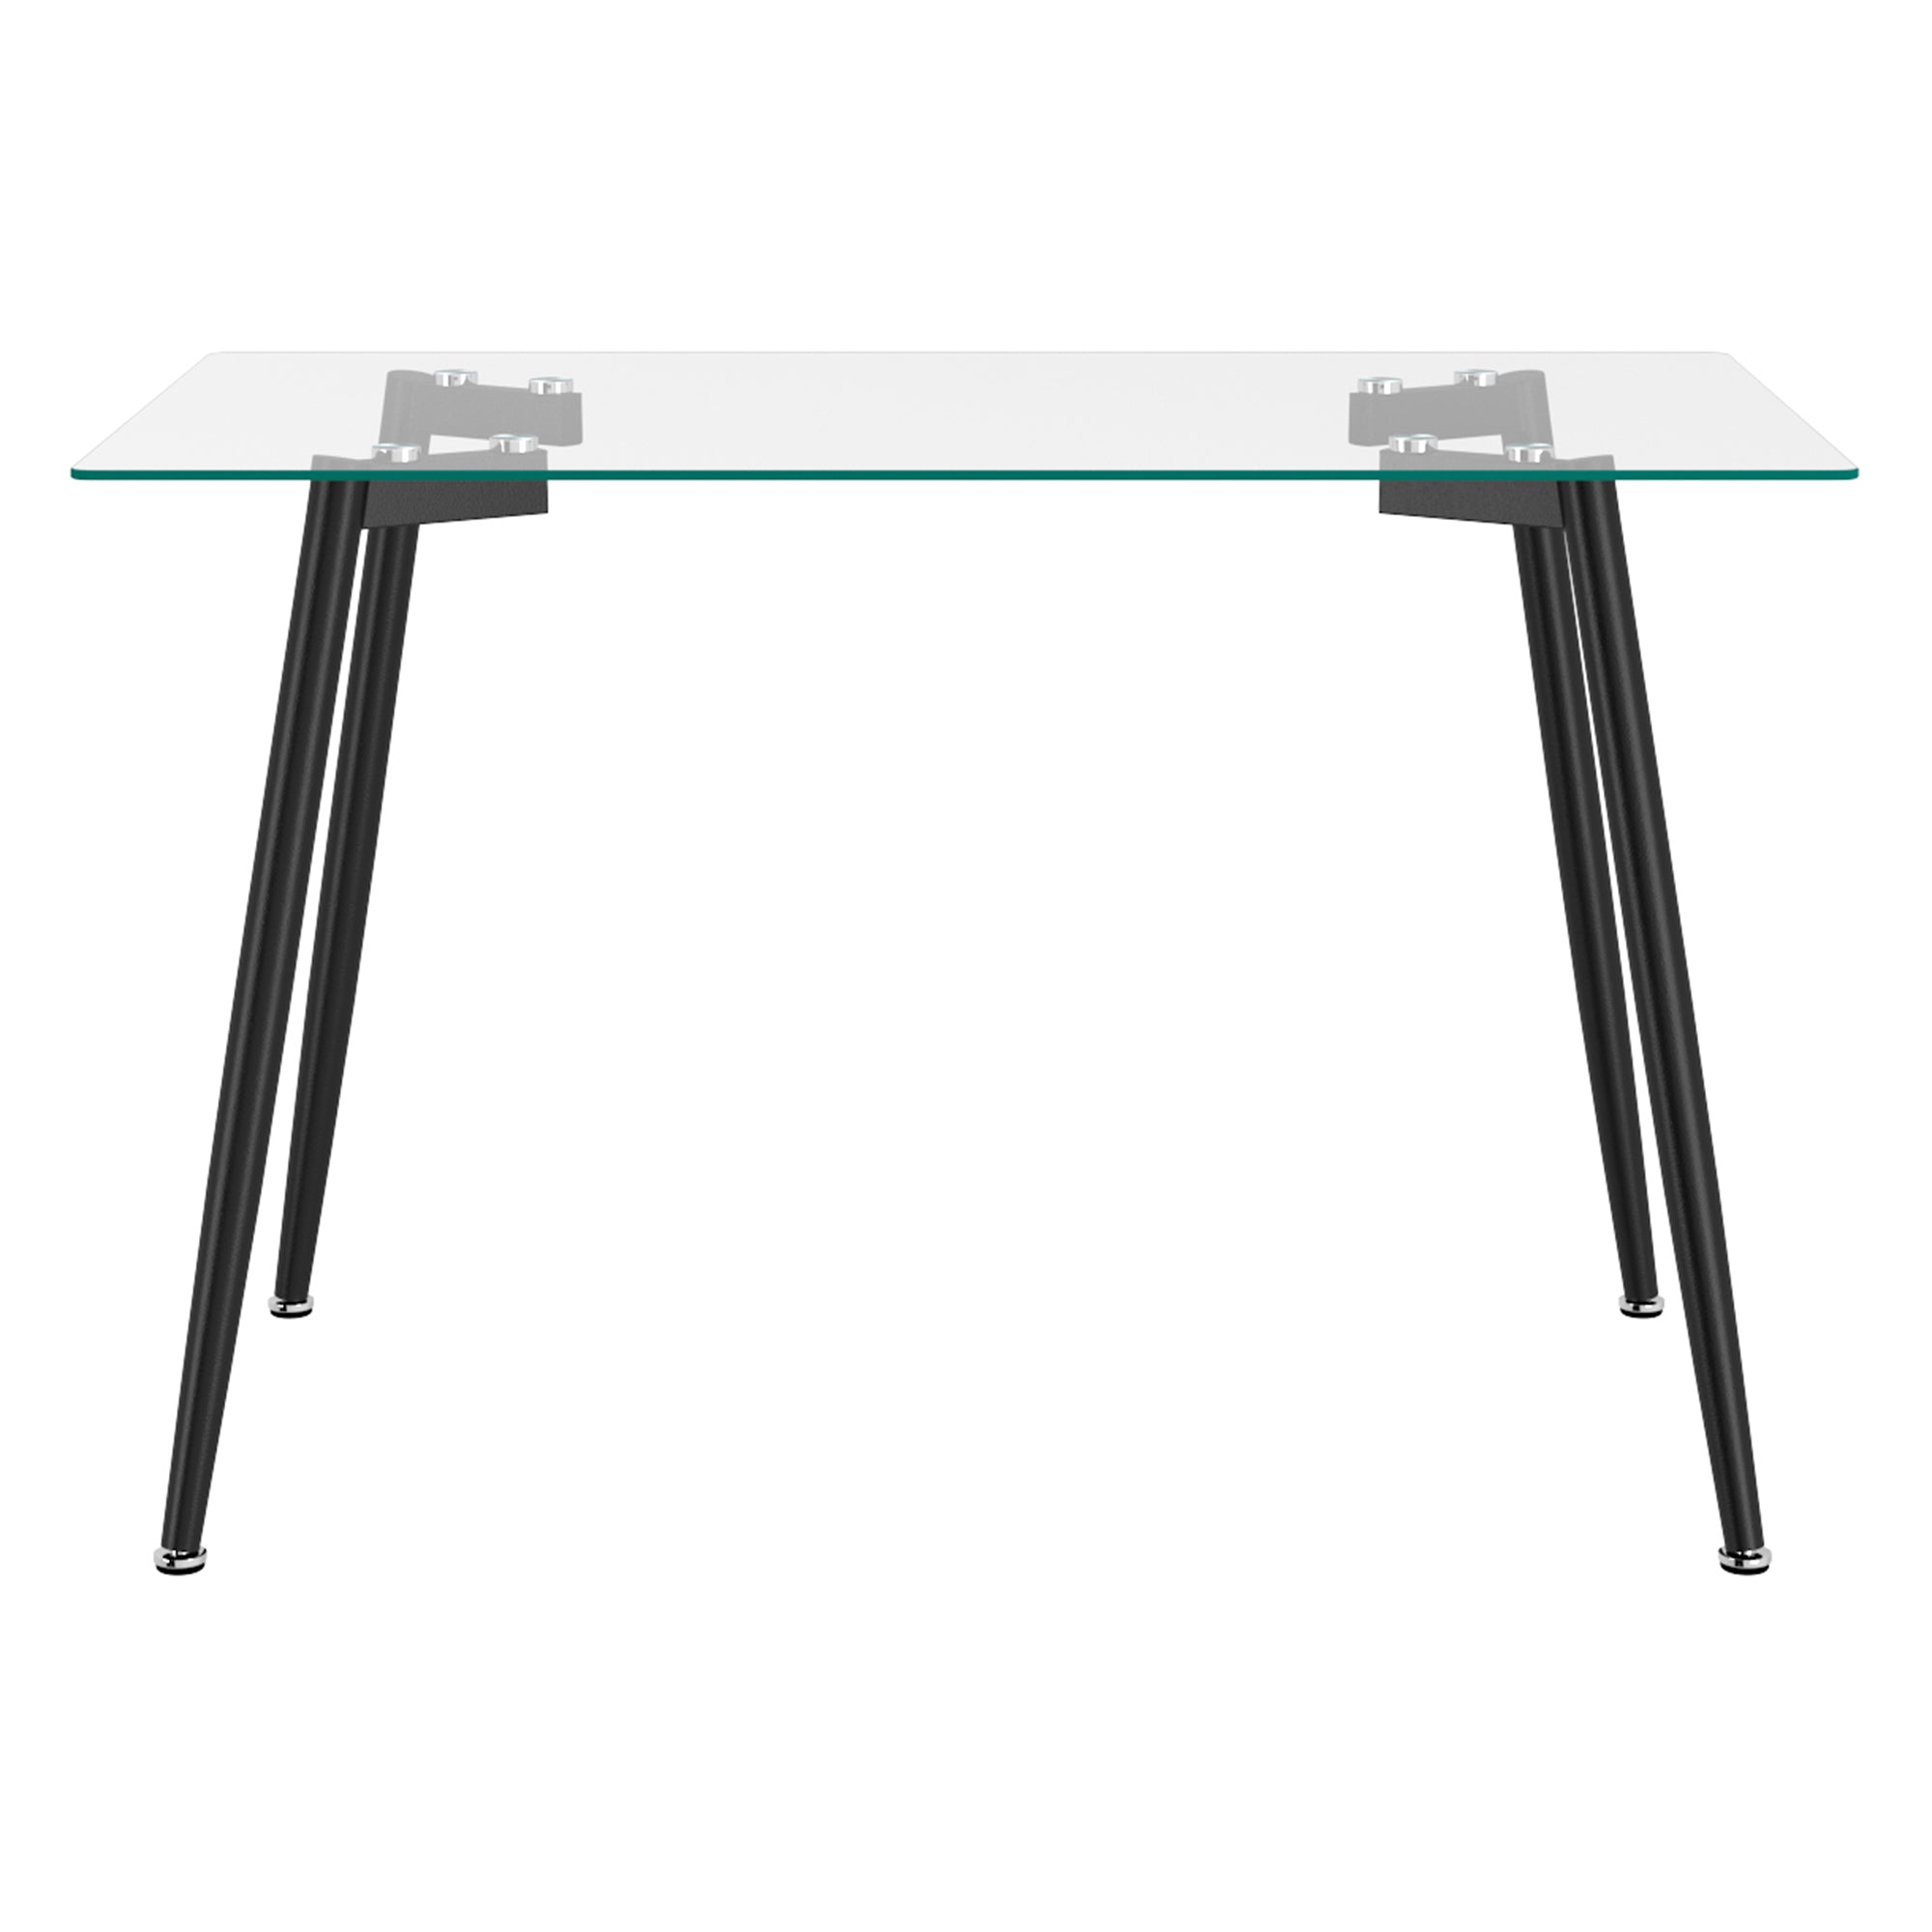 ABBOT- 48" DINING TABLE-CLEAR GLASS / BLACK